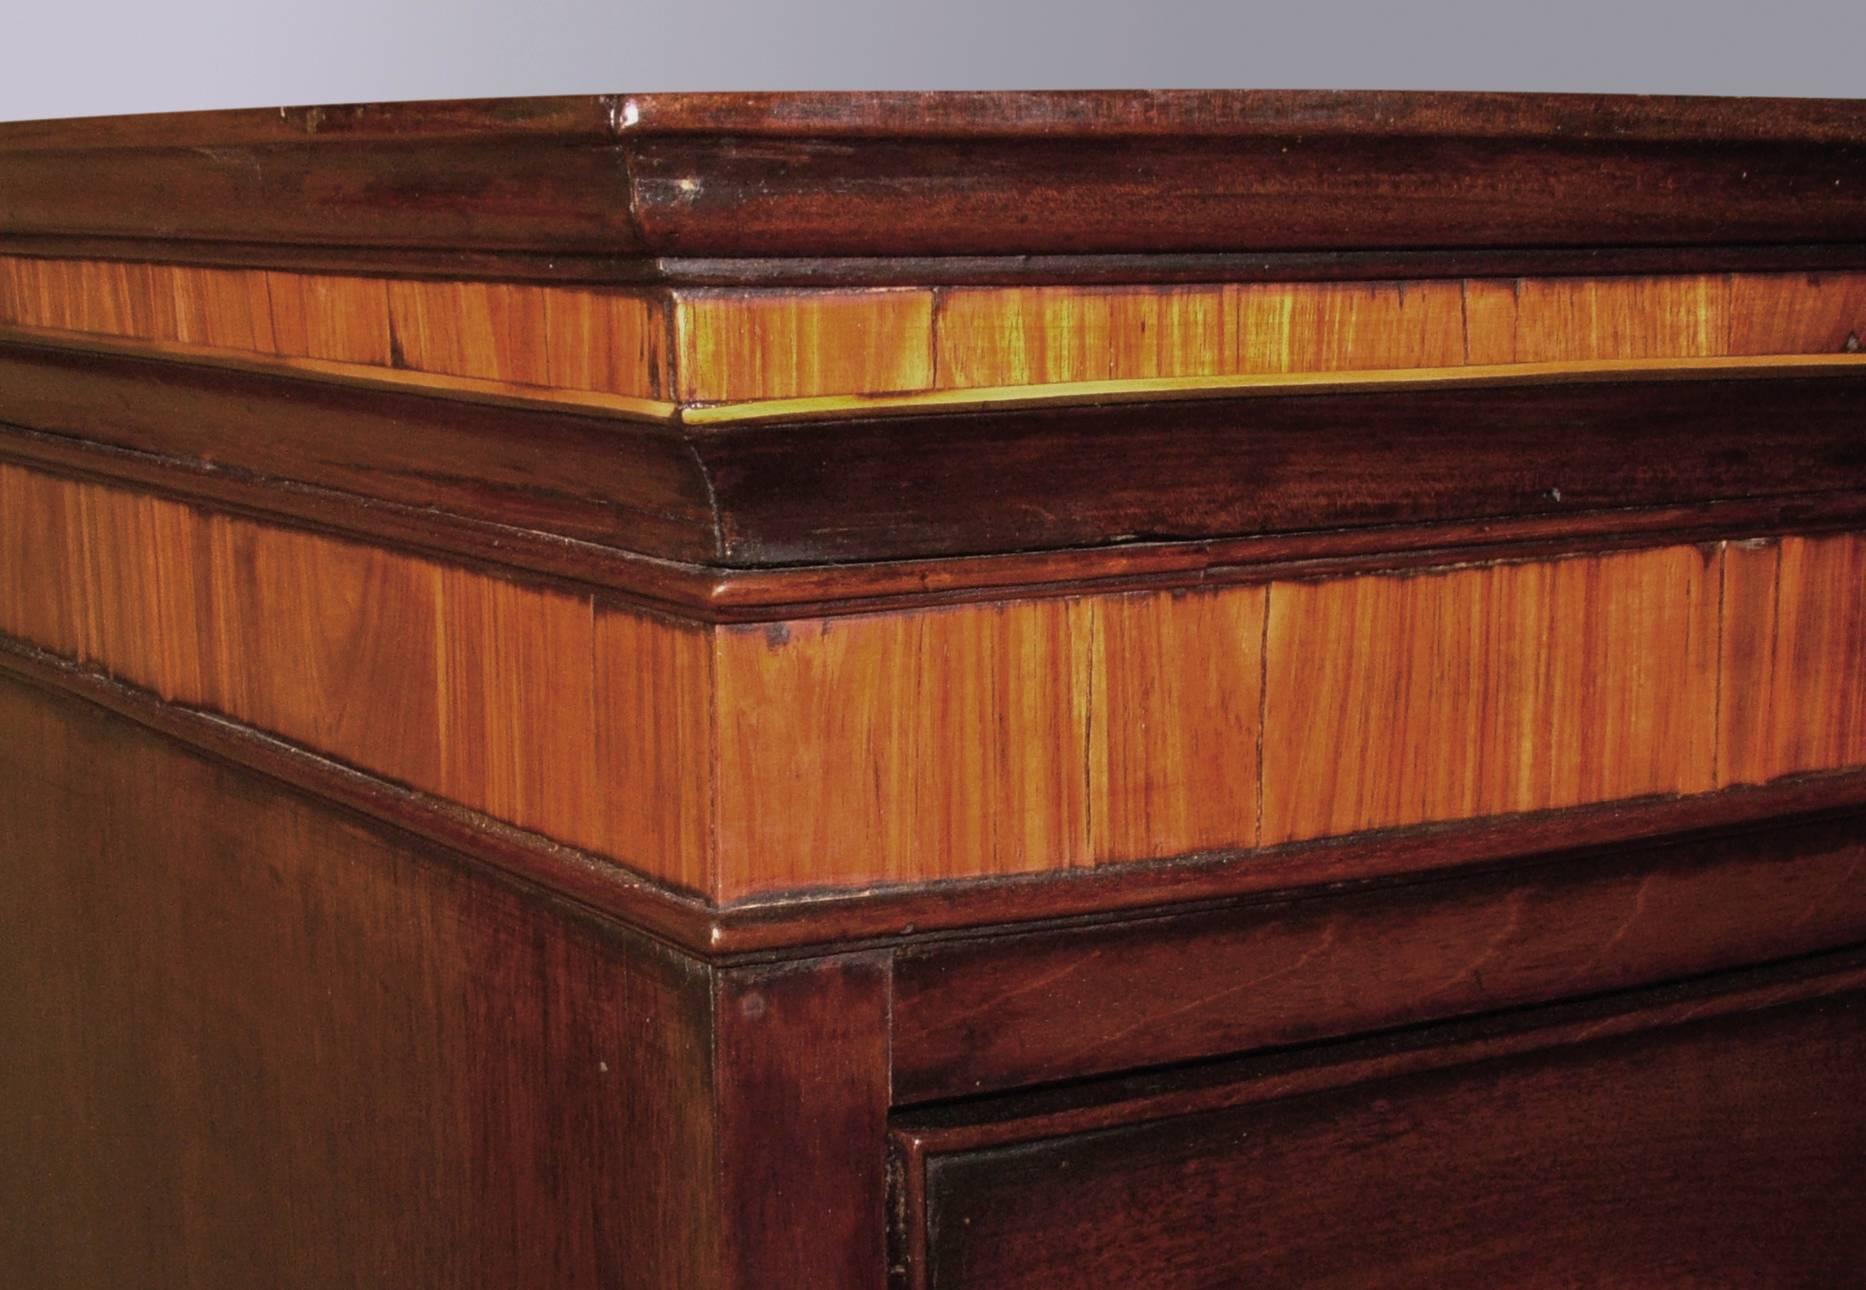 A George III period figured mahogany bow-fronted tallboy of attractive small proportions, having moulded and kingwood crossbanded cornice above seven cock beaded drawers supported on splay-leg base with shaped apron.